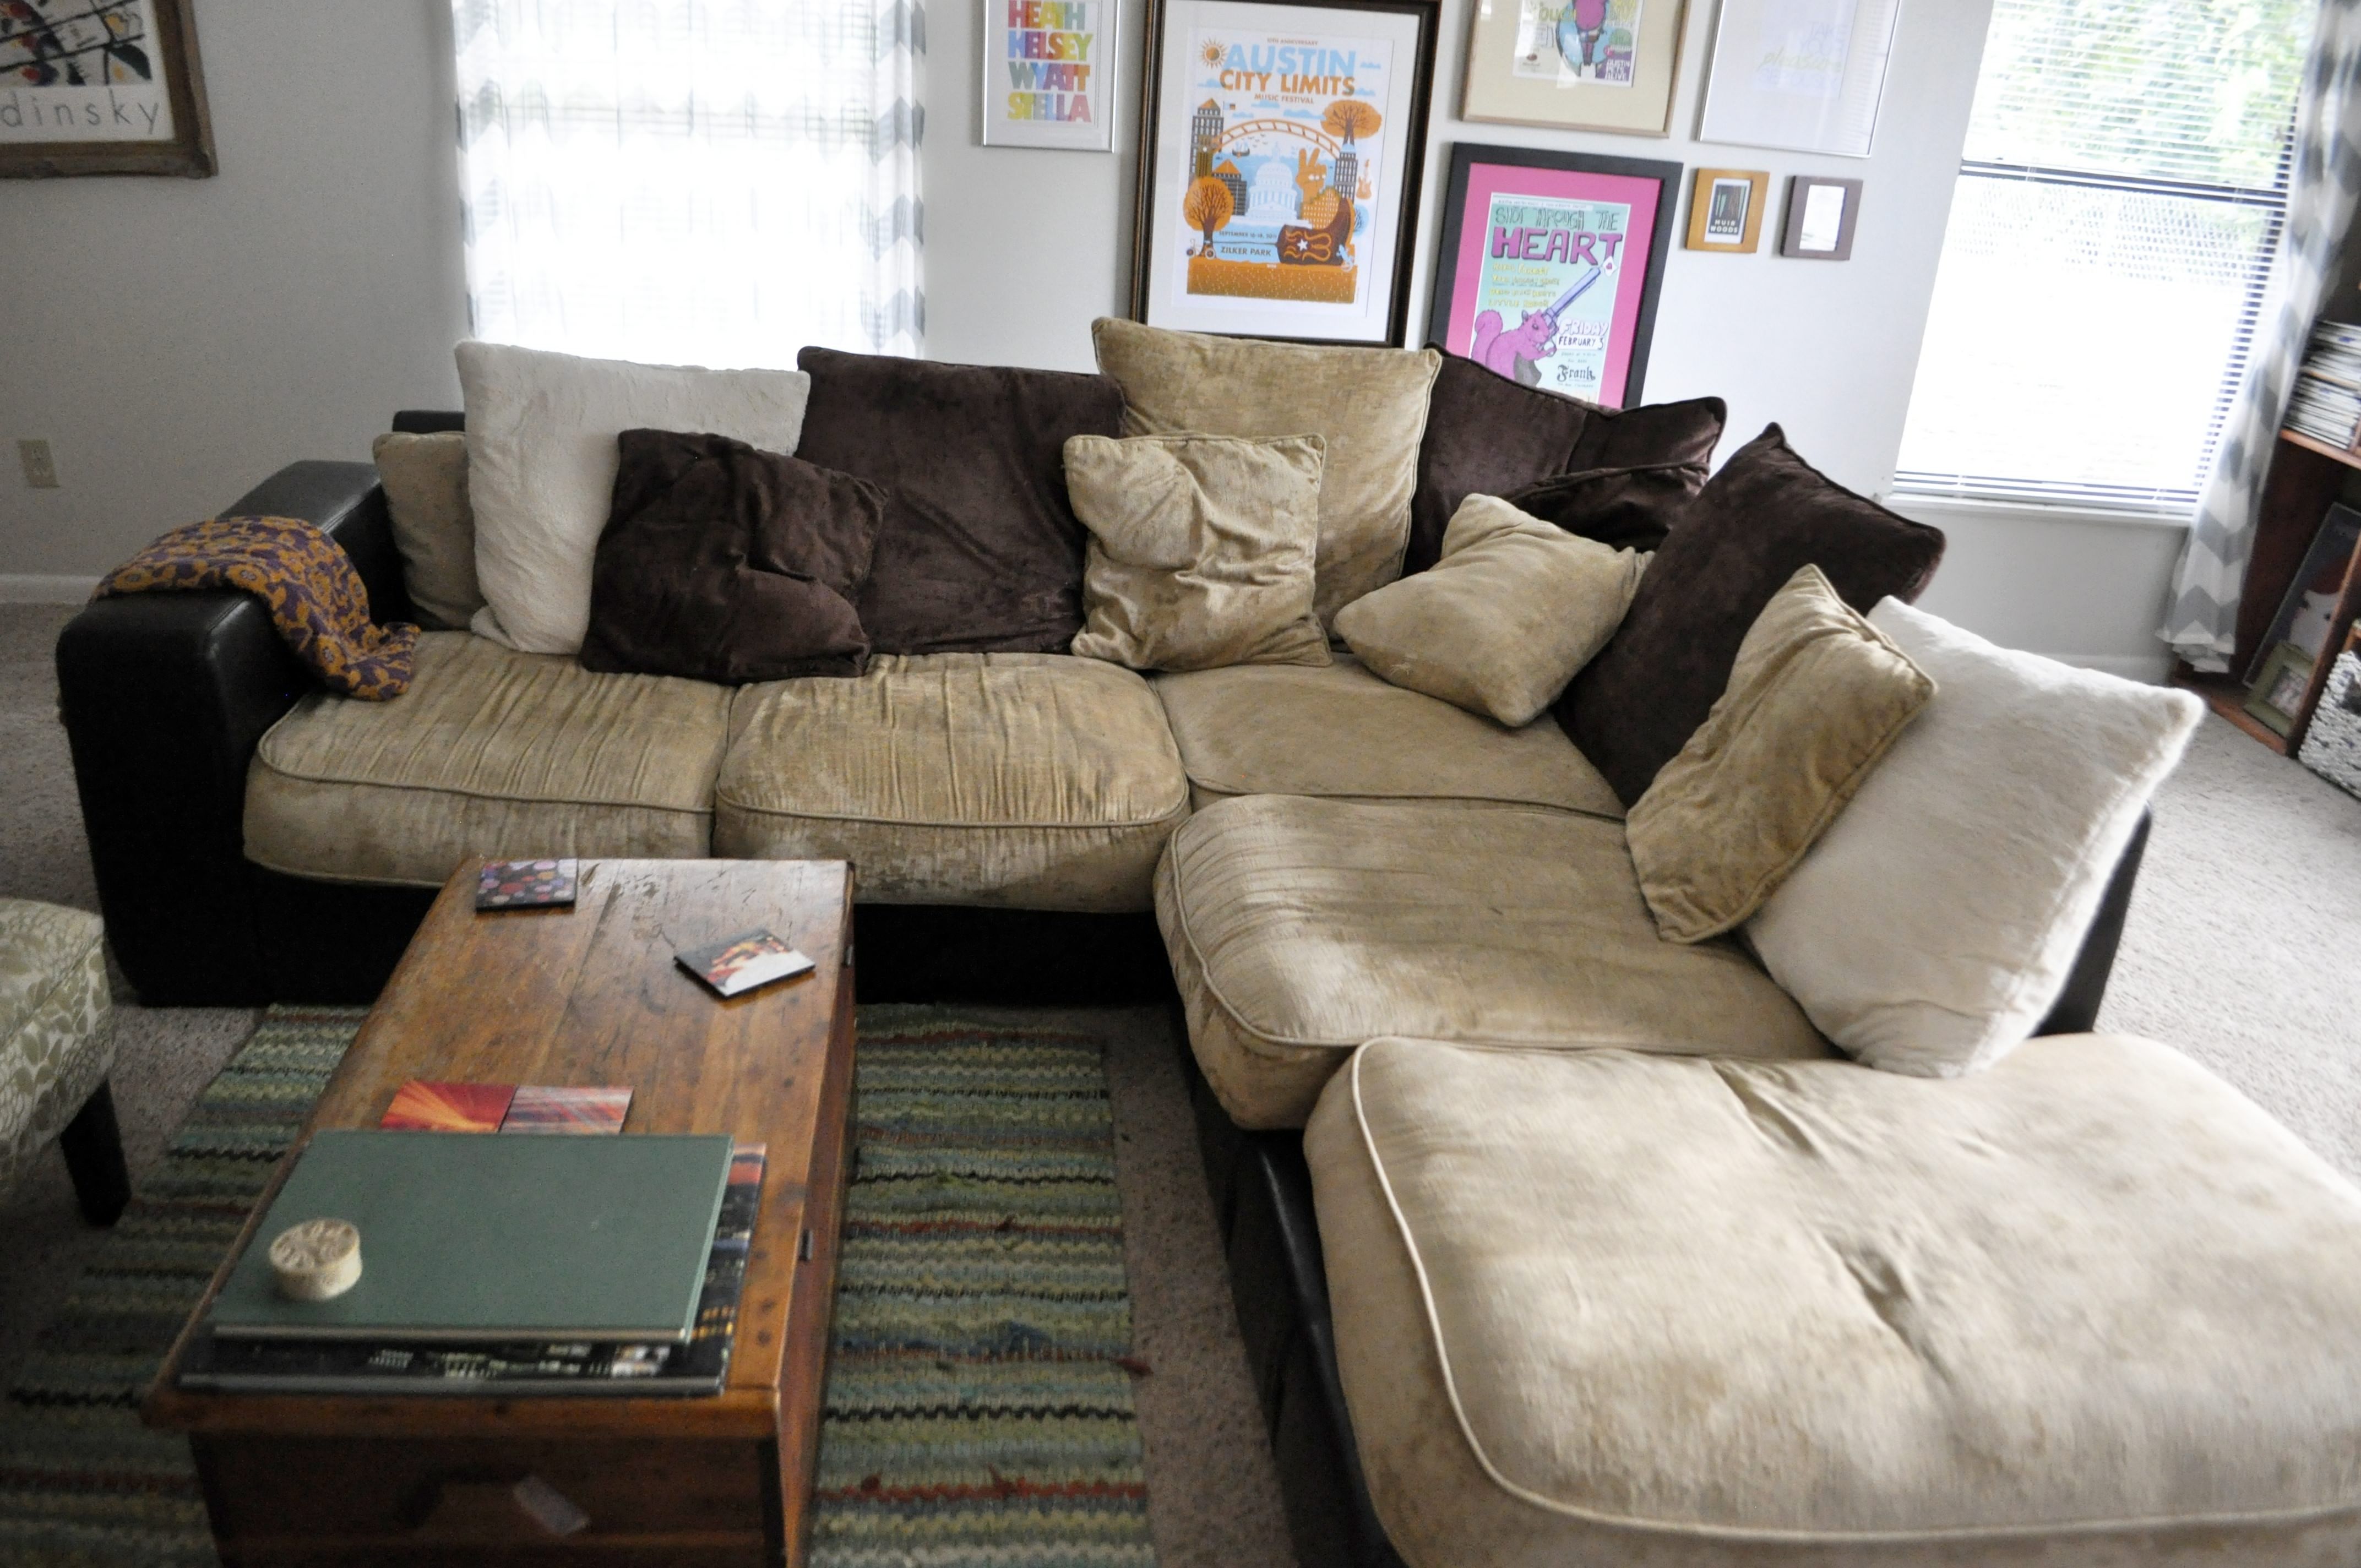 Picture Of Comfortable Sectional Sofa On Home Remodel Ideas Jk22 Intended For Comfortable Sectional Sofa (View 8 of 12)